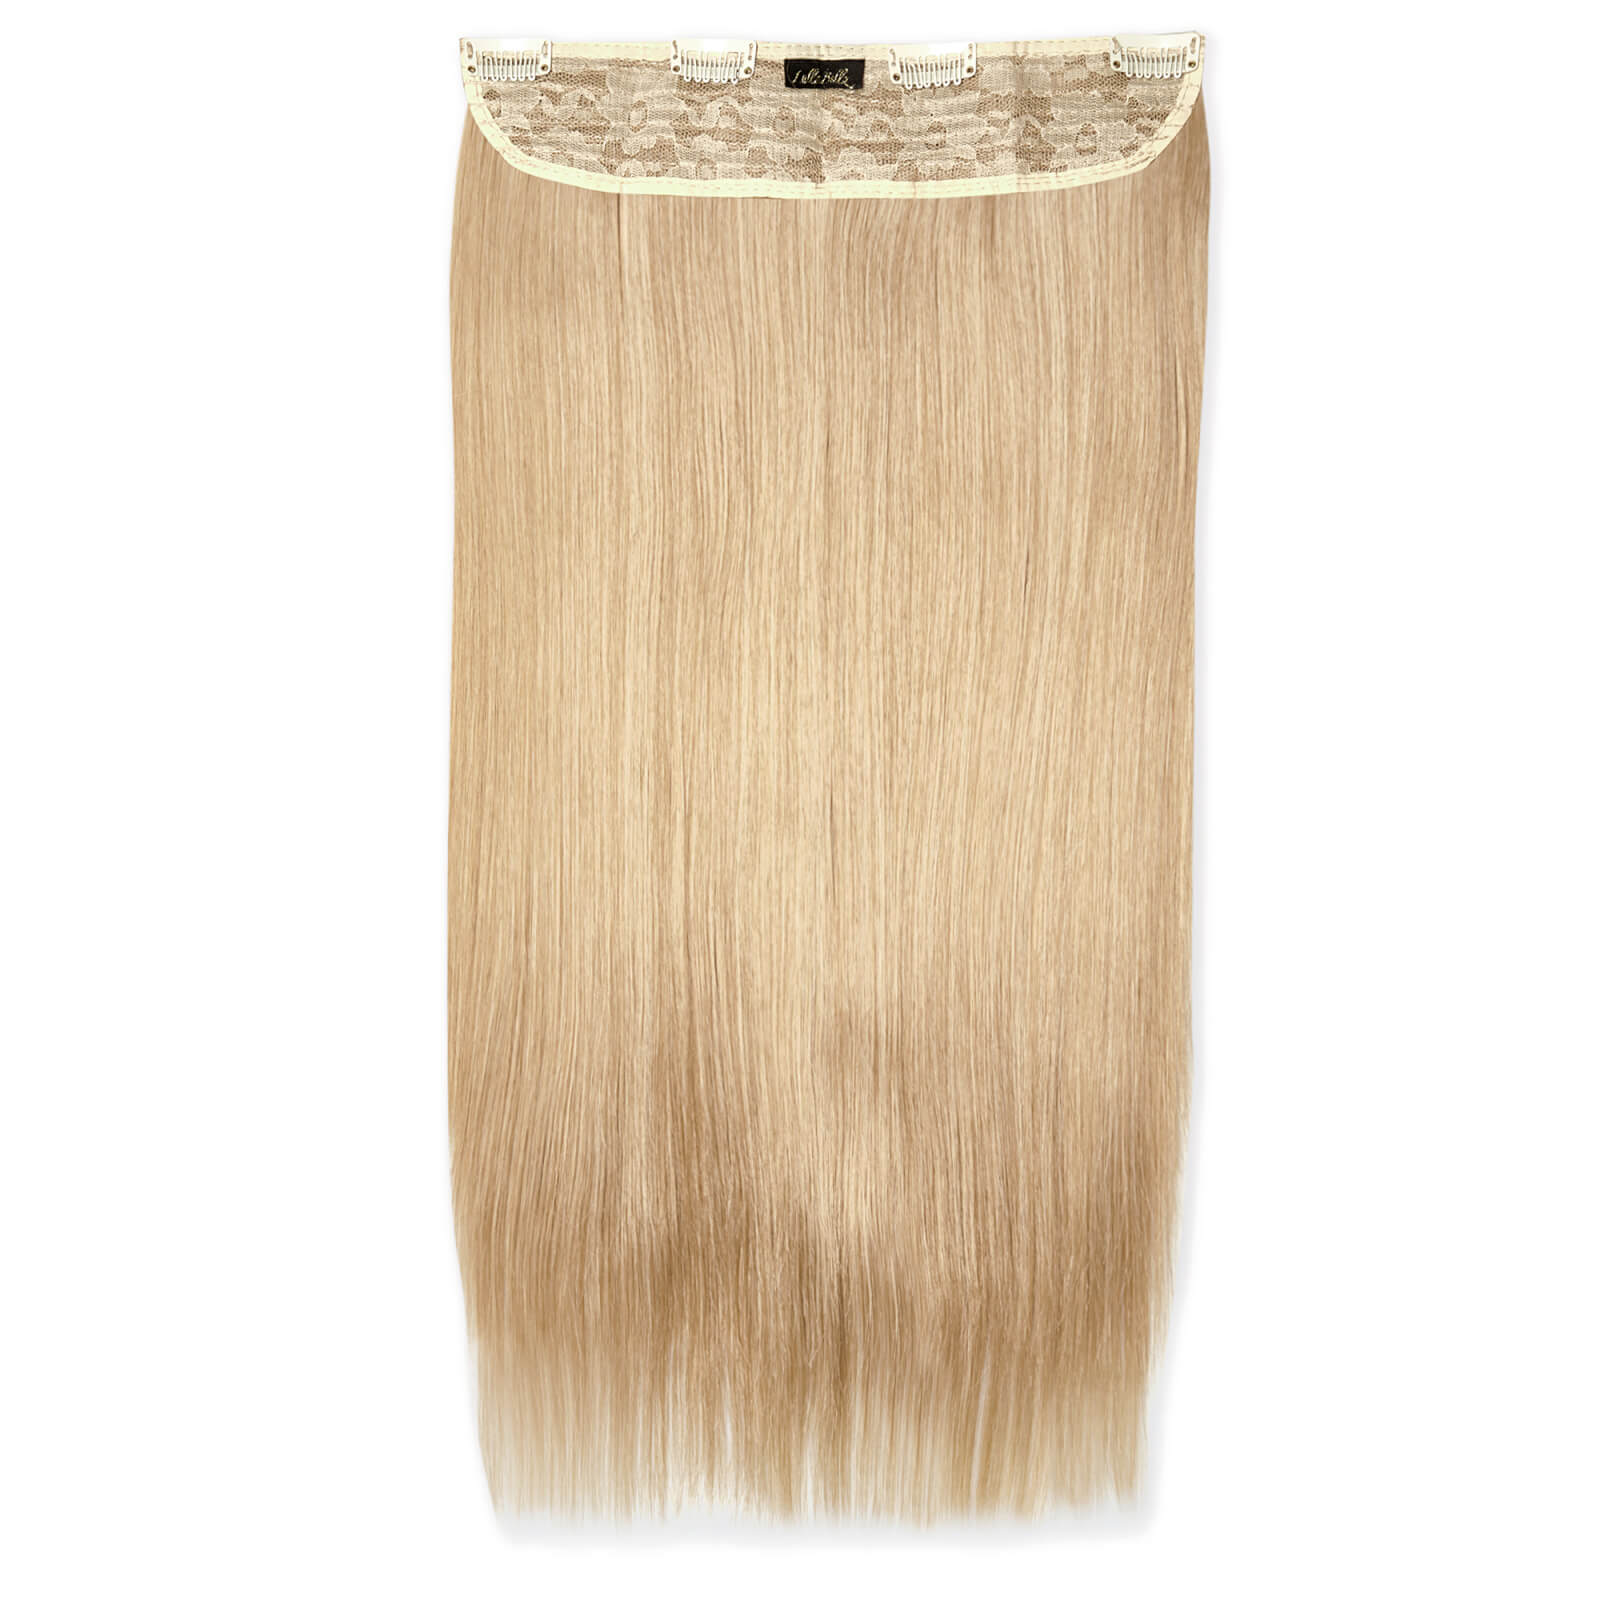 LullaBellz Thick 24 1-Piece Straight Clip in Hair Extensions (Various Colours) - Honey Blonde